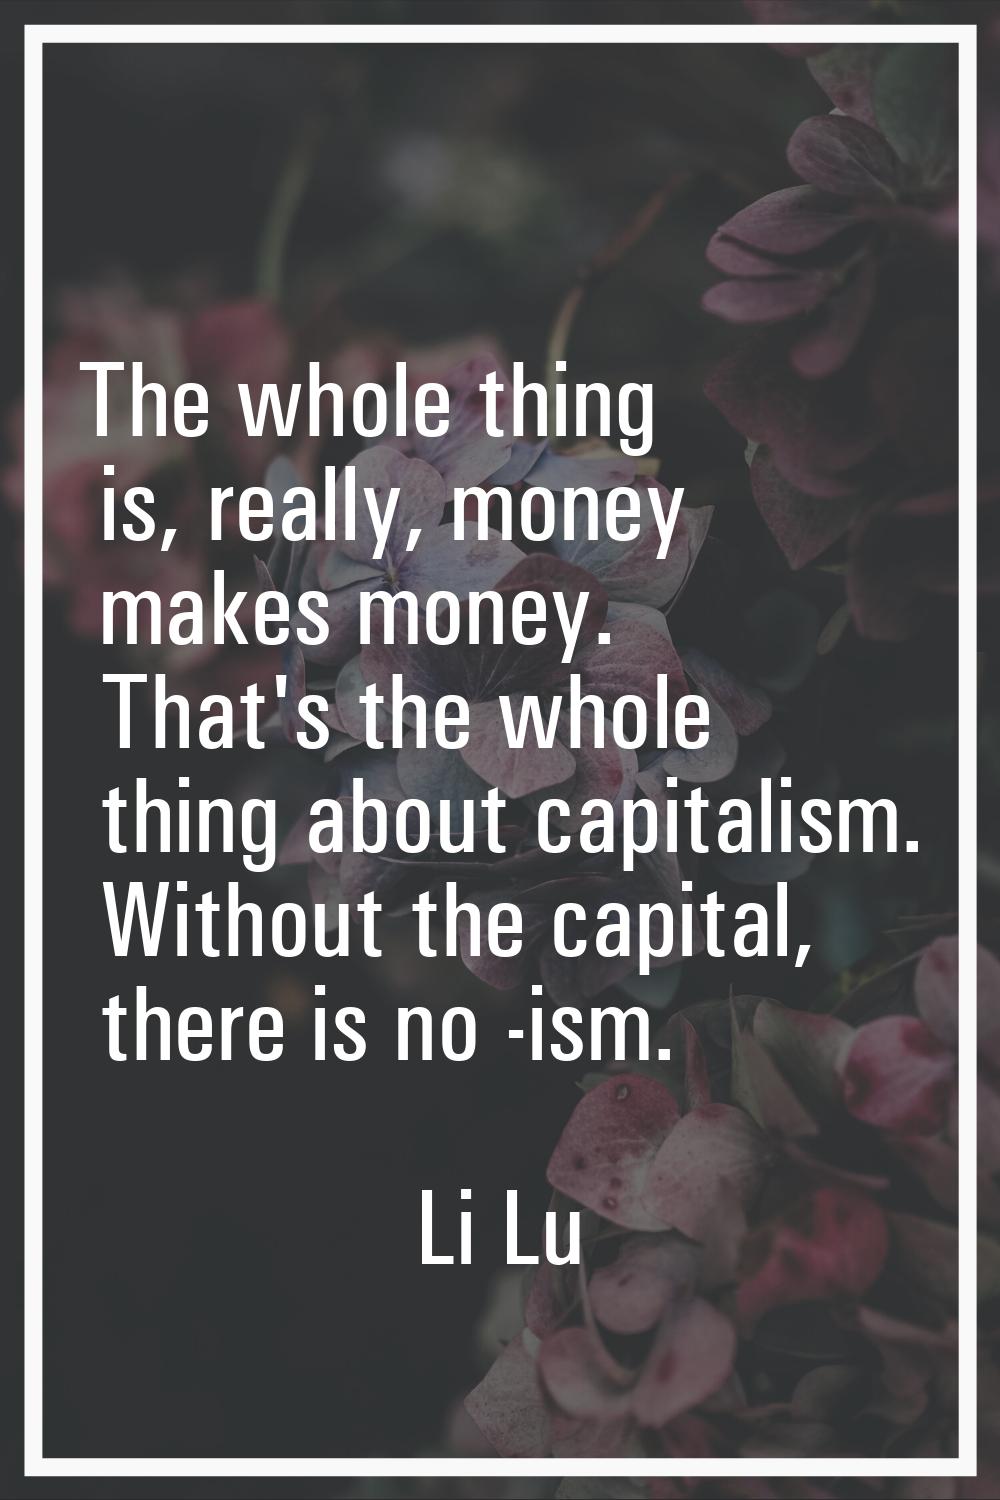 The whole thing is, really, money makes money. That's the whole thing about capitalism. Without the